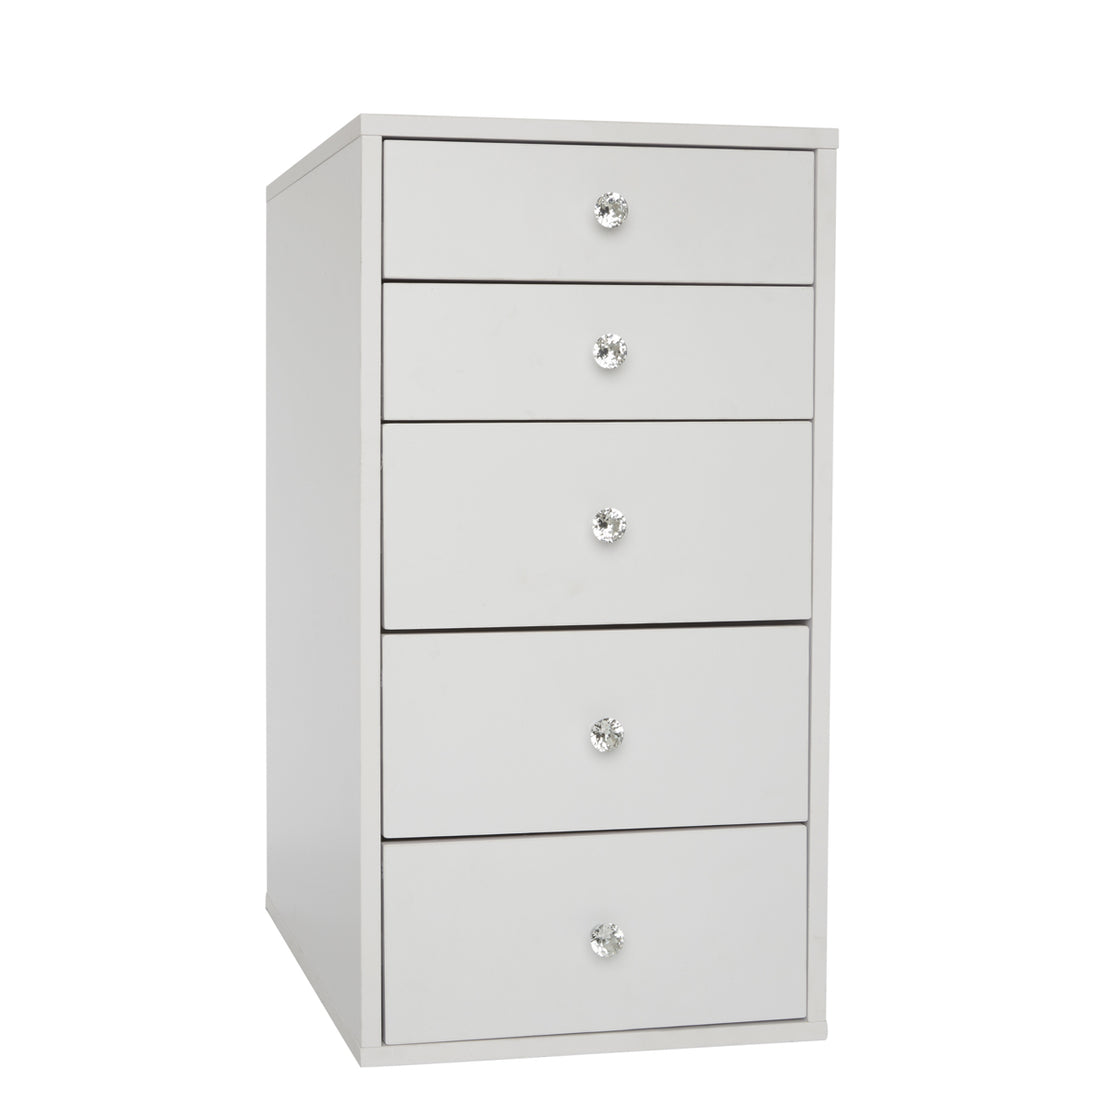 SlayStation 5-Drawer Makeup Vanity Storage Unit in Bright White | 14.25 x 22.375 x 14.25 in | Impressions Vanity Co. | Aluminum/Glass